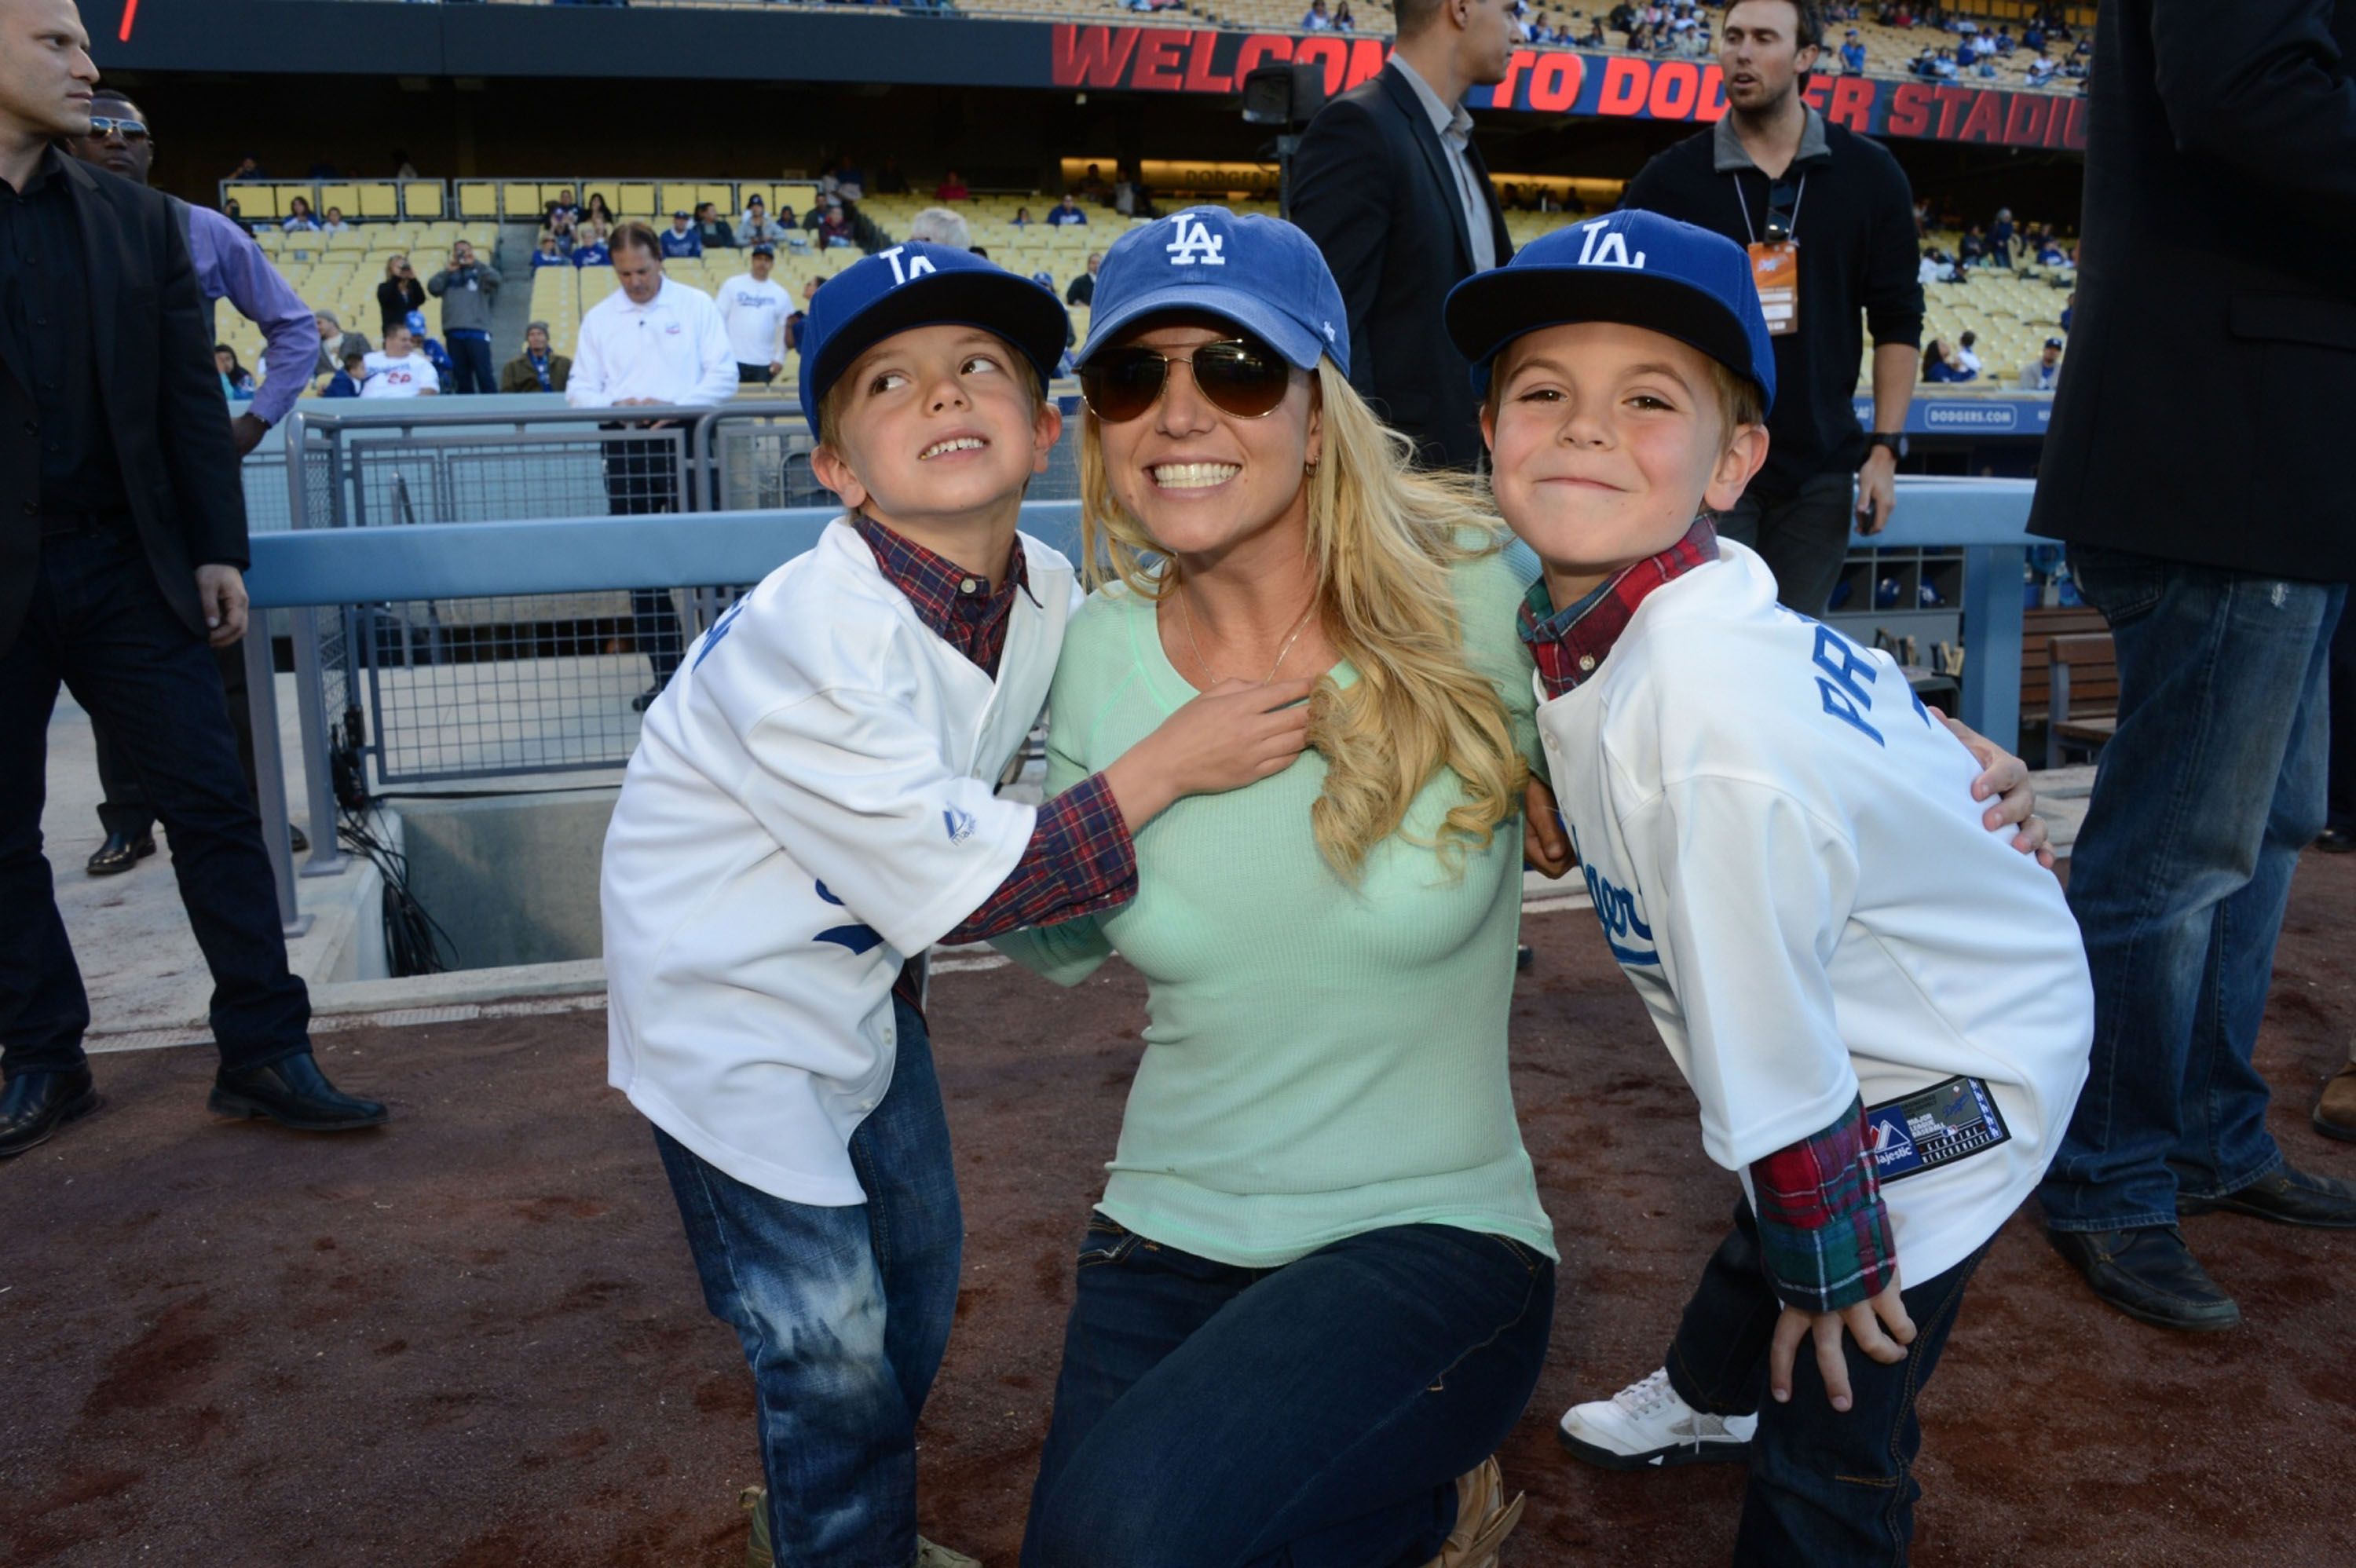 Britney Spearswith sons Jayden and Sean Federline at the Dodger Stadium in 2013 in Los Angeles | Souce: Getty Images